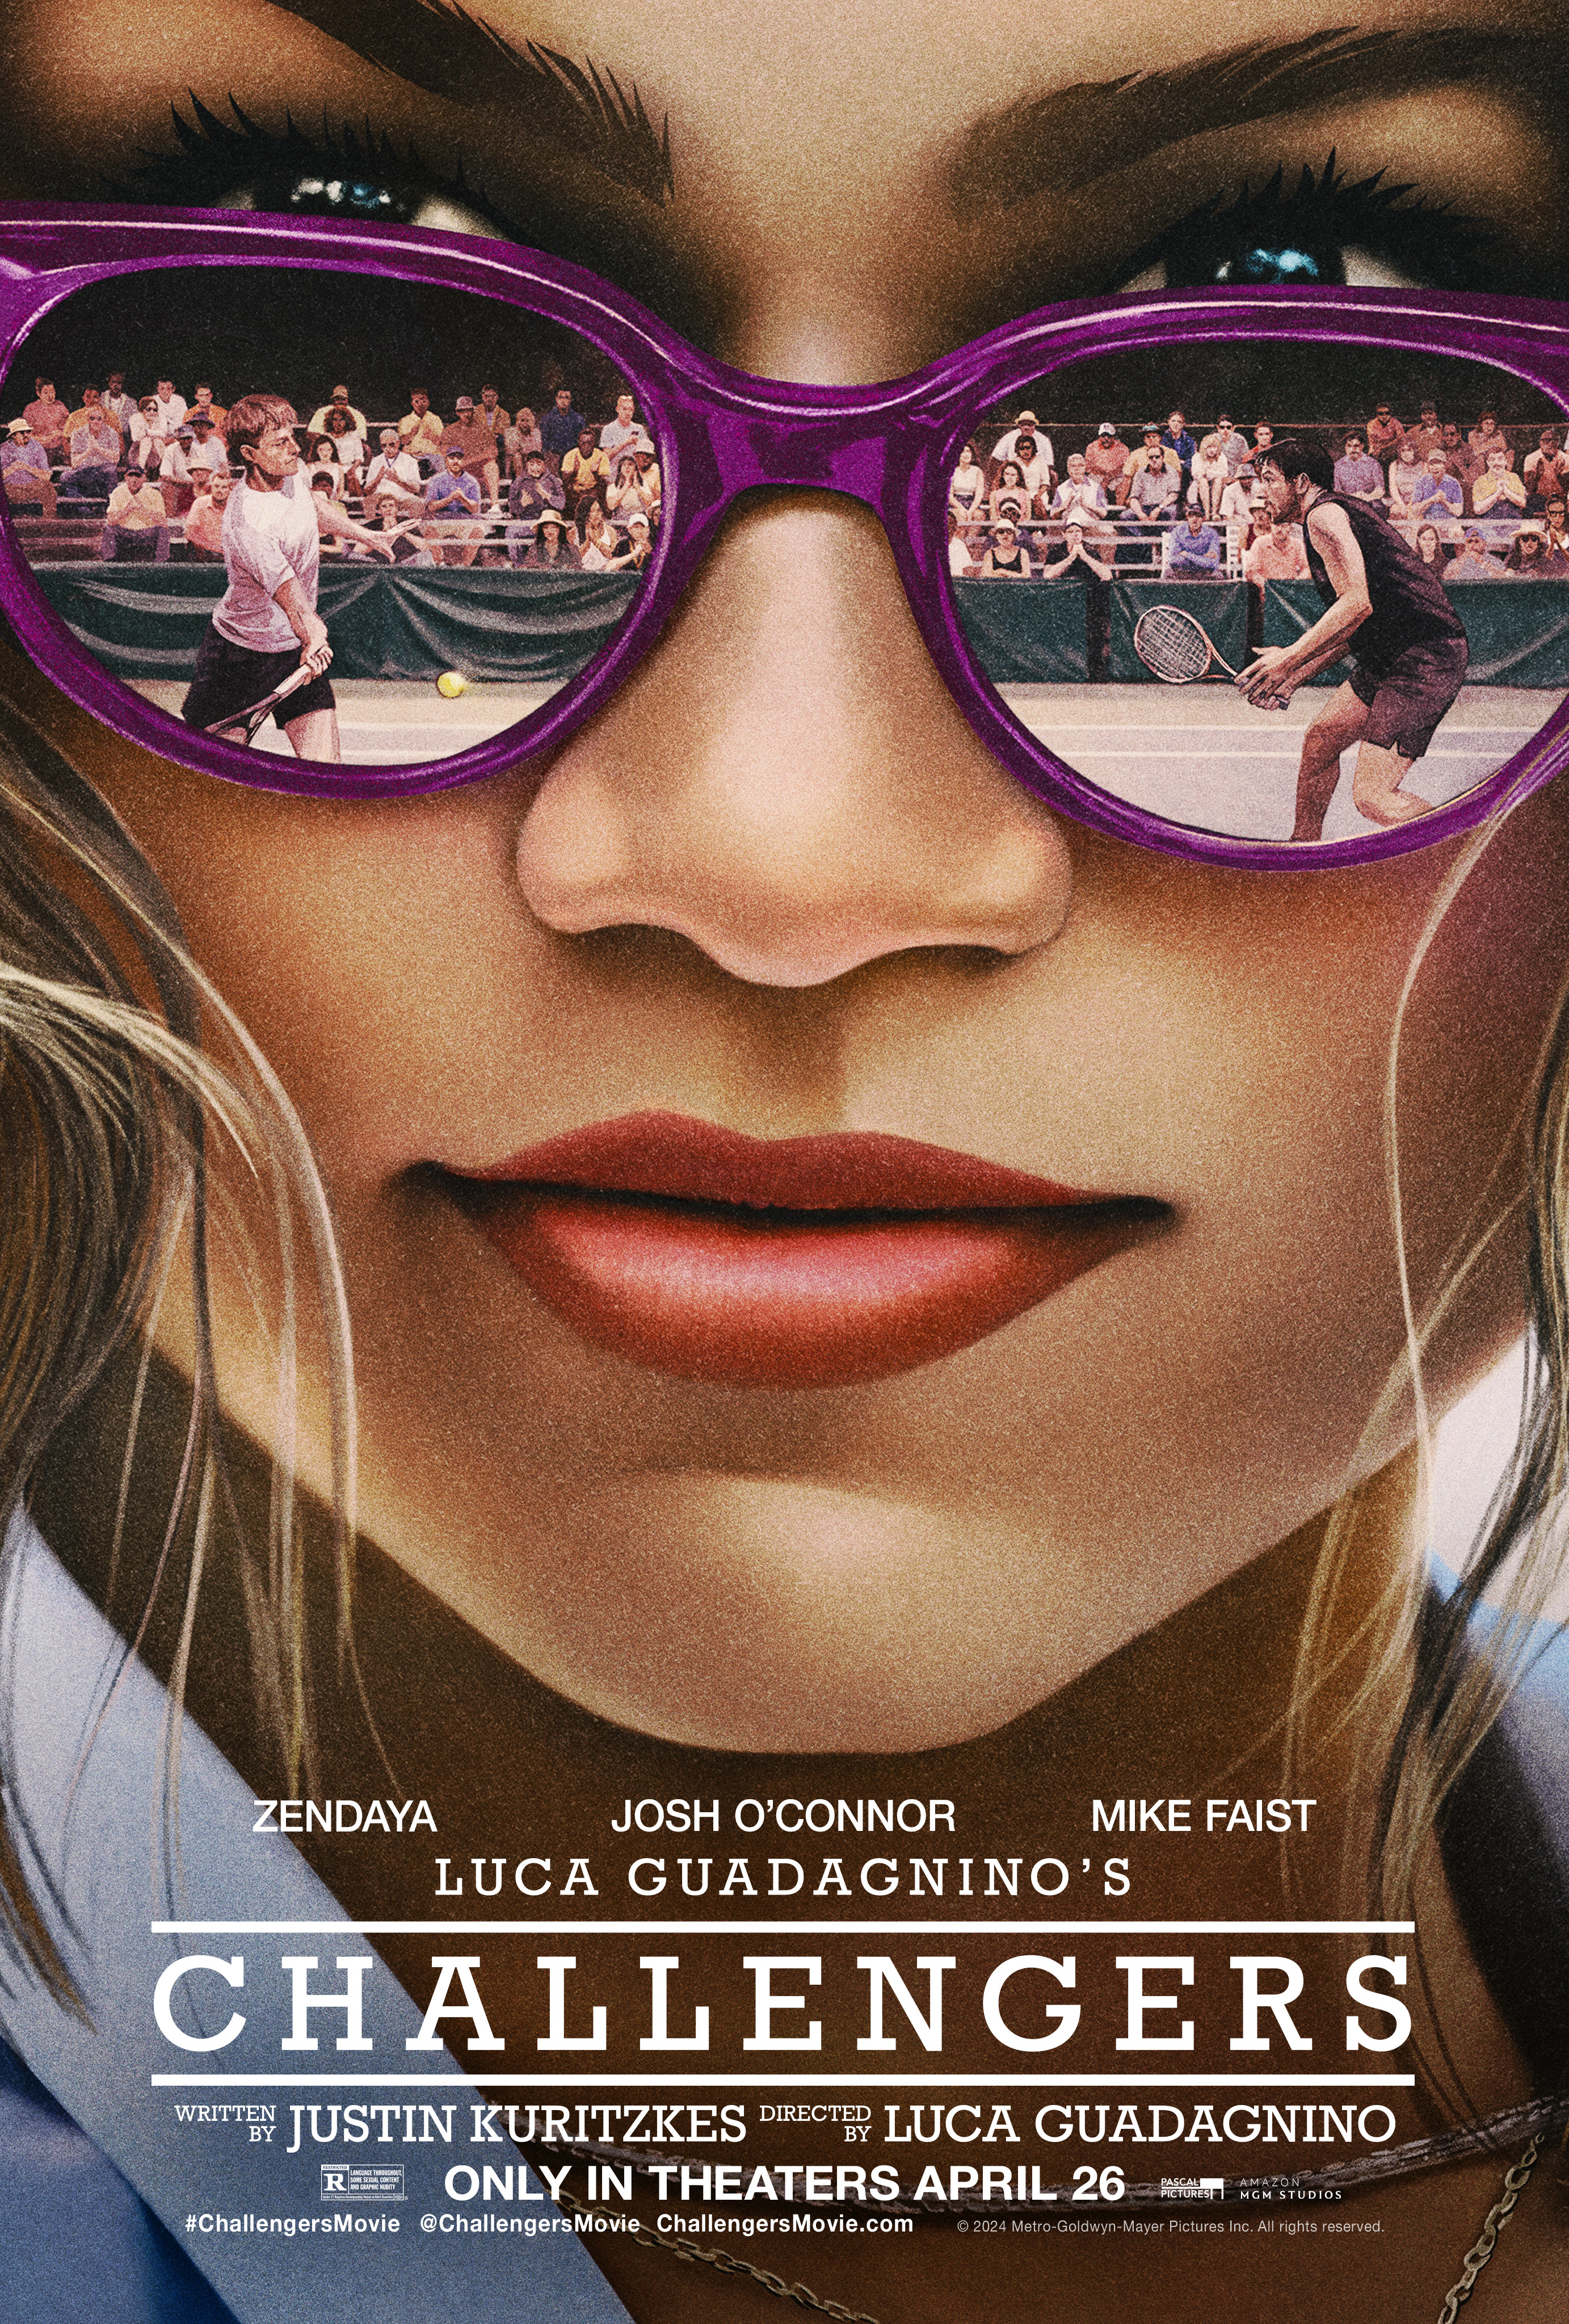 Movie poster for &quot;Challengers&quot; featuring Zendaya with a reflection of a tennis match in her sunglasses